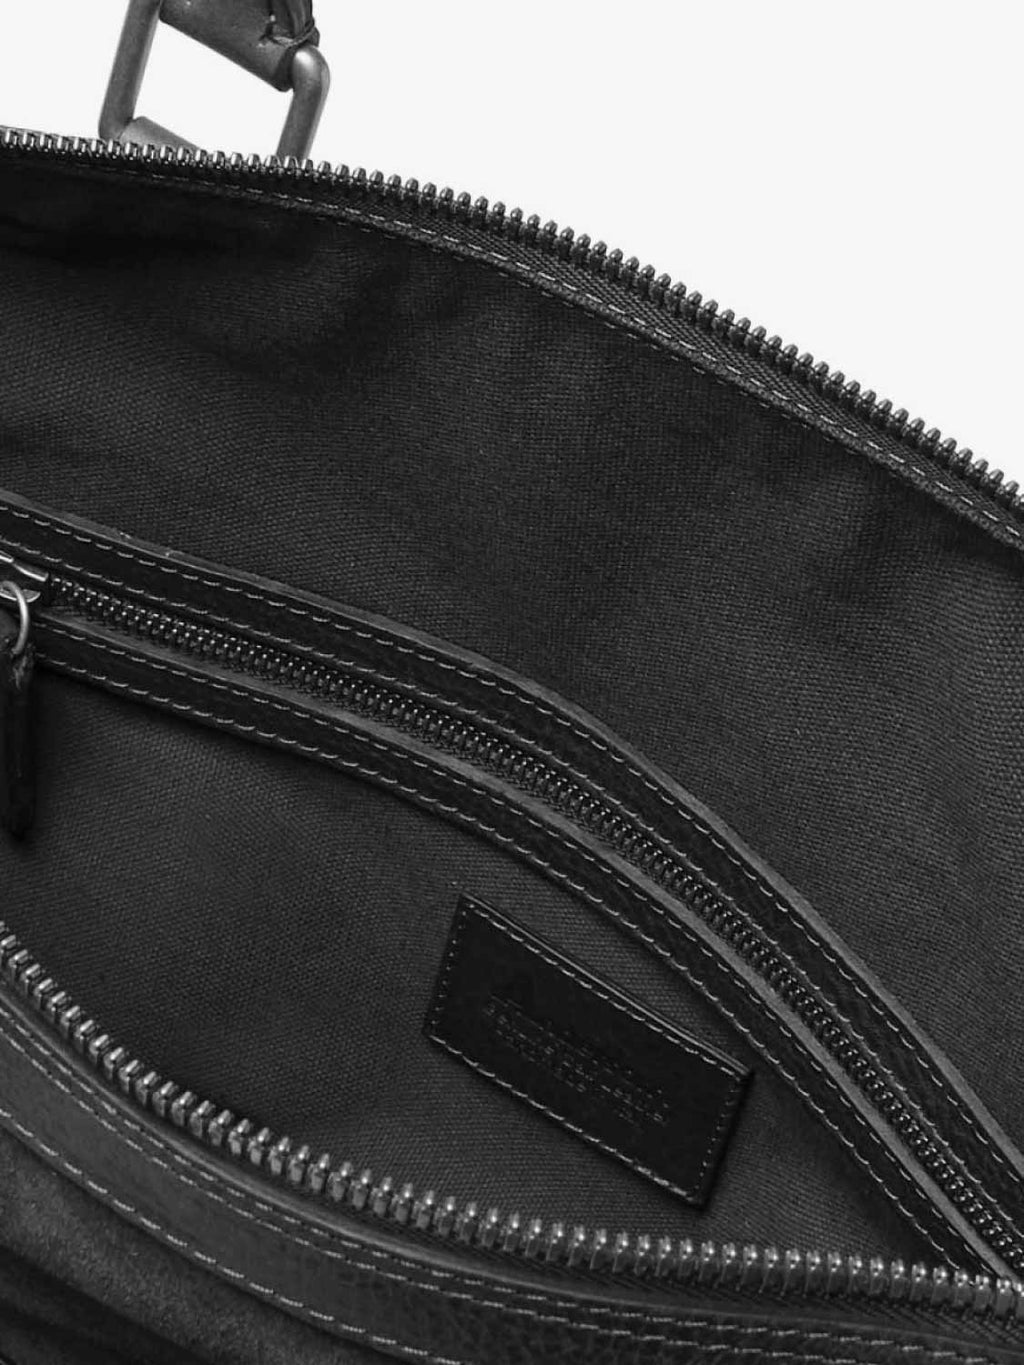 Anderson's Suede And Full-Grain Leather Holdall | B